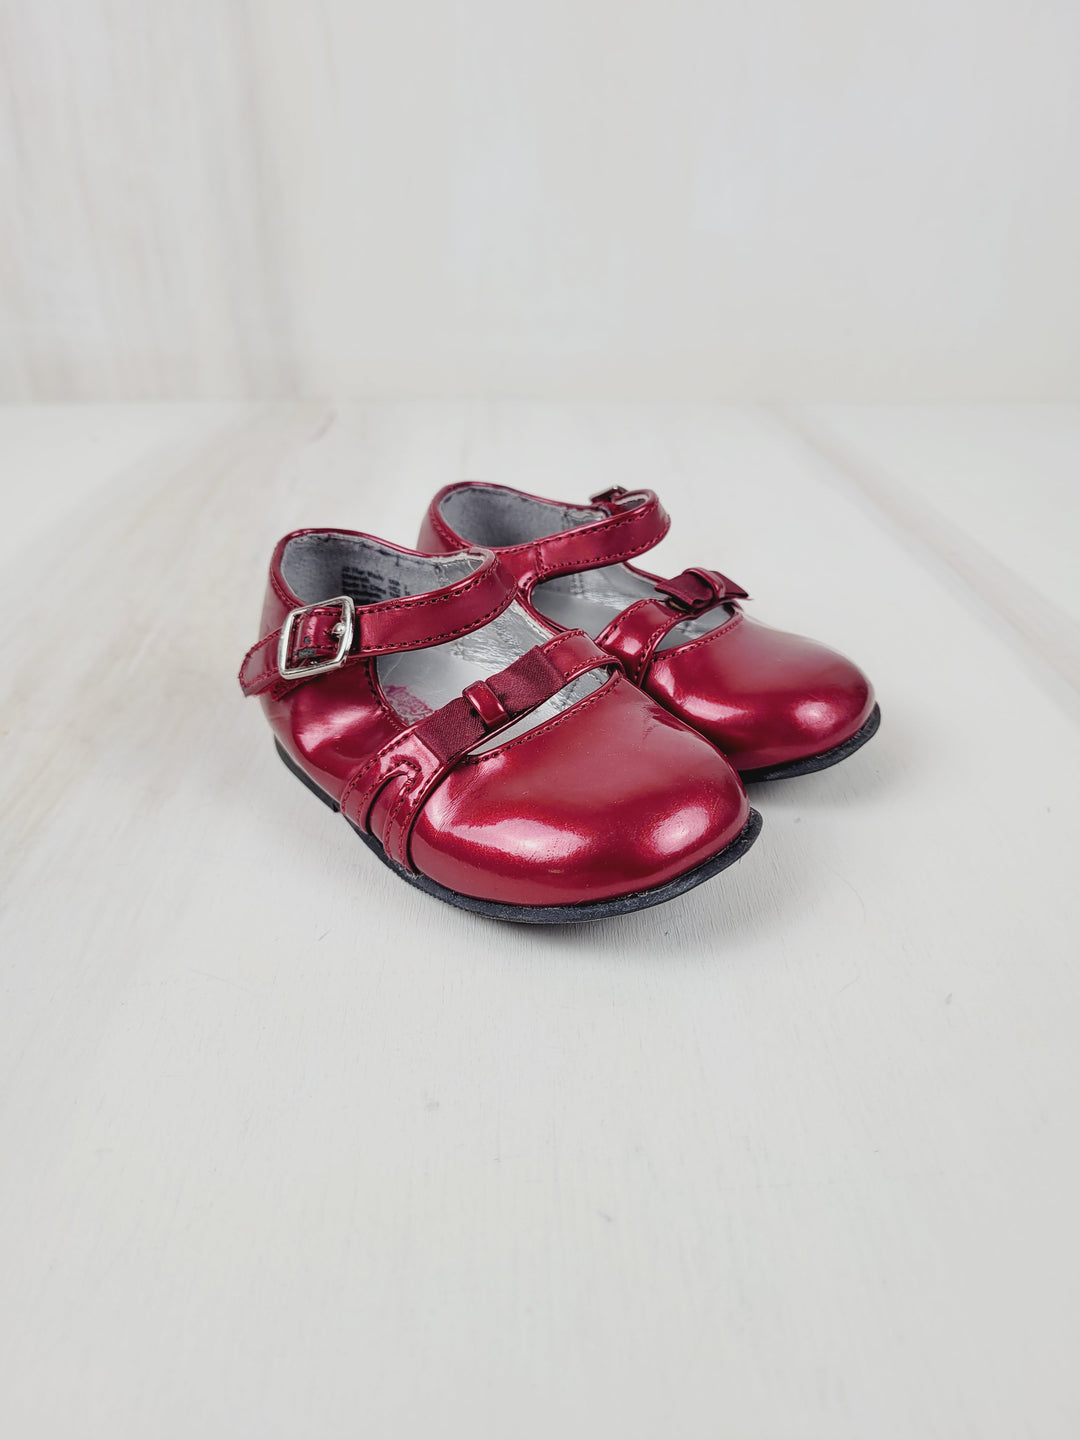 TEENY TOES RED SHINY SHOES SIZE 3 TODDLER VGUC